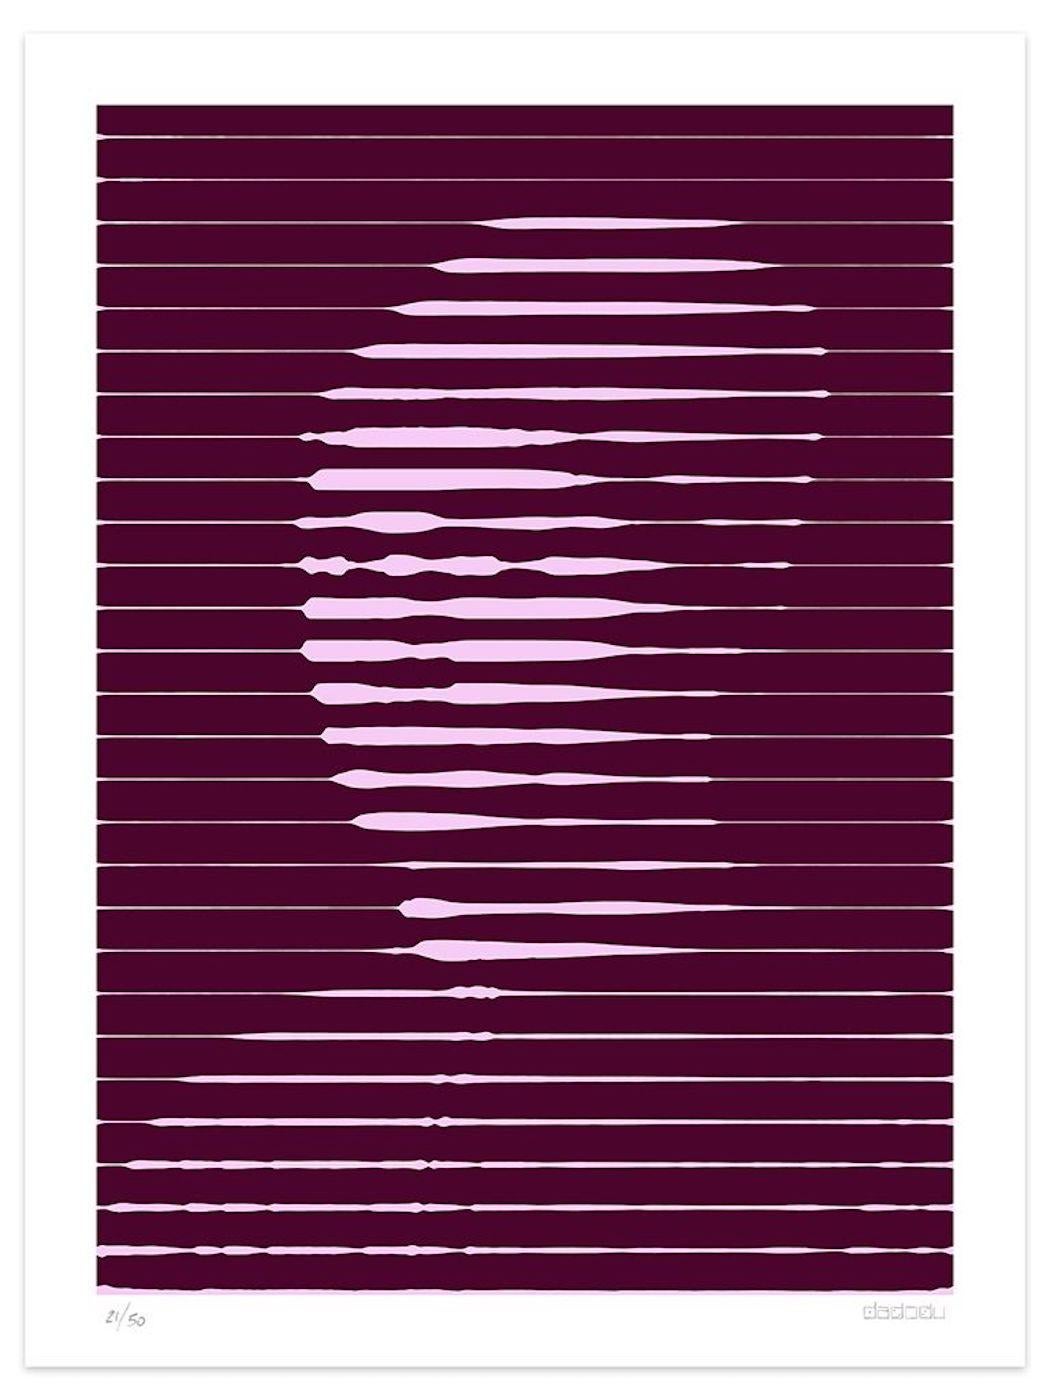 Image dimensions: 60 x 43.2 cm.

Pink Lines is an outstanding giclée print realized by the contemporary artist Dadodu in 2016.

This original artwork represents Portrait of a Man by Antonello da Messina with horizontal pink lines on a dark red